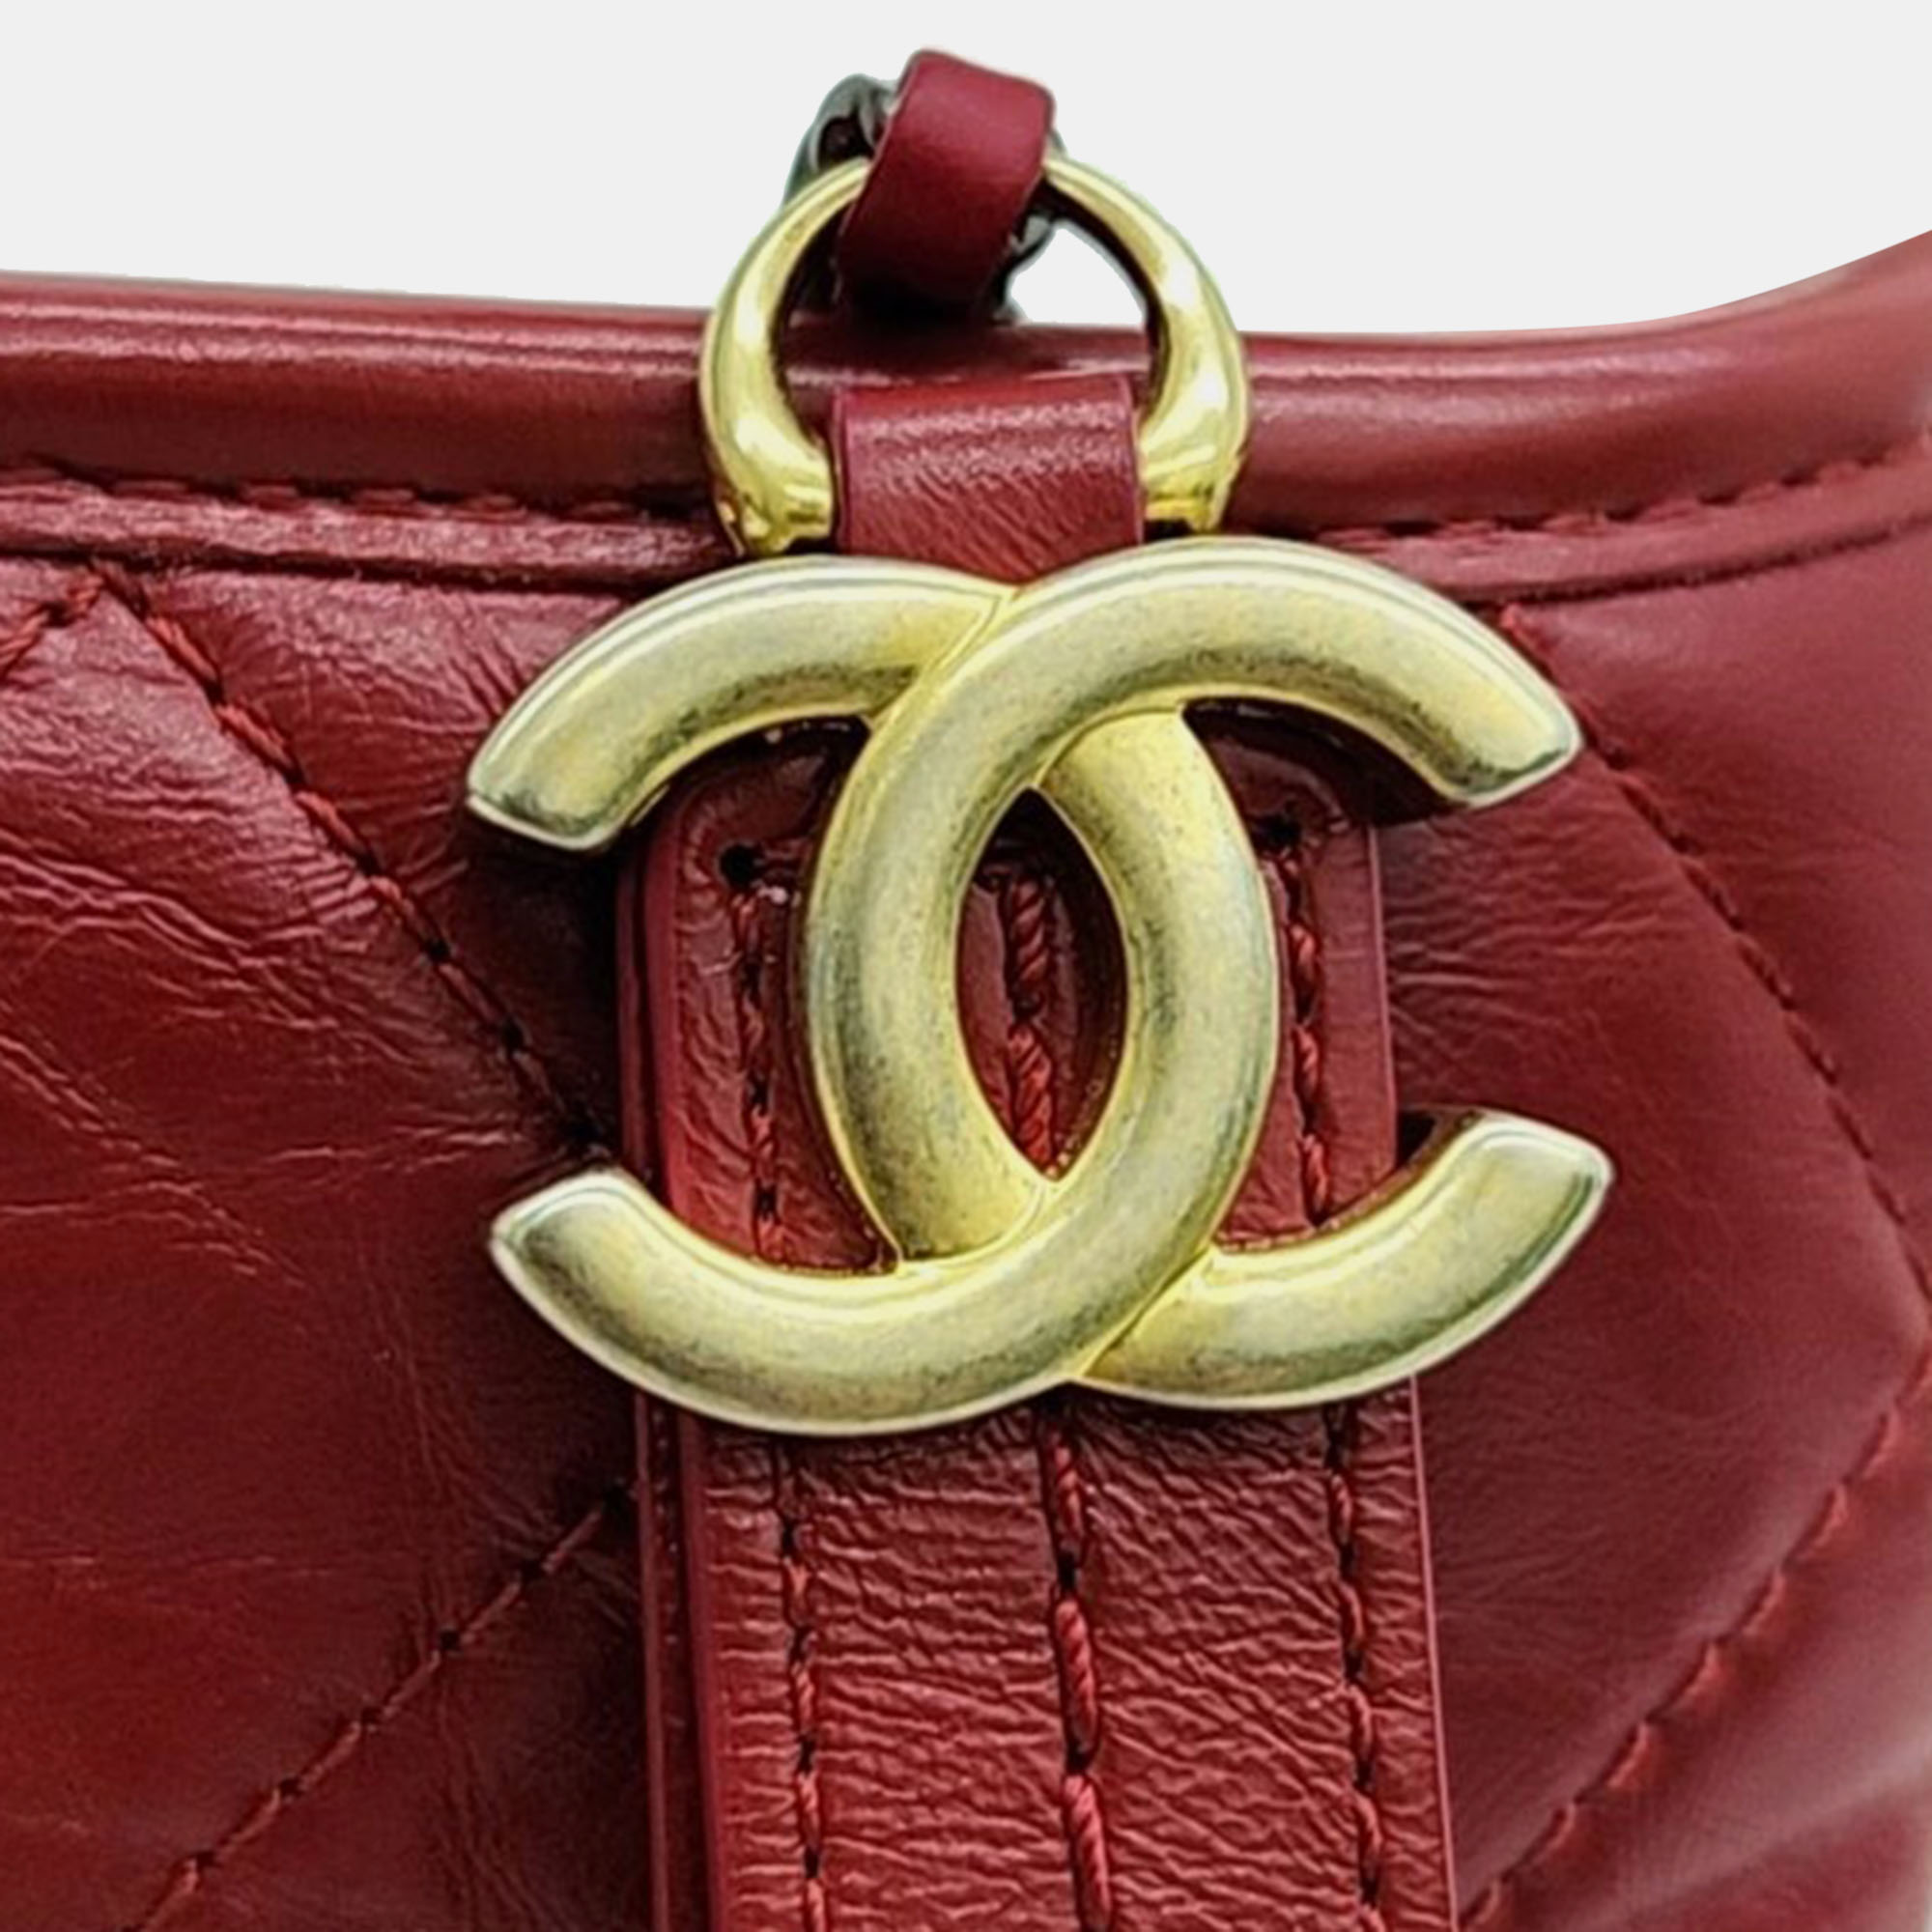 Chanel Gabrielle Hobo Bag Small With Strap